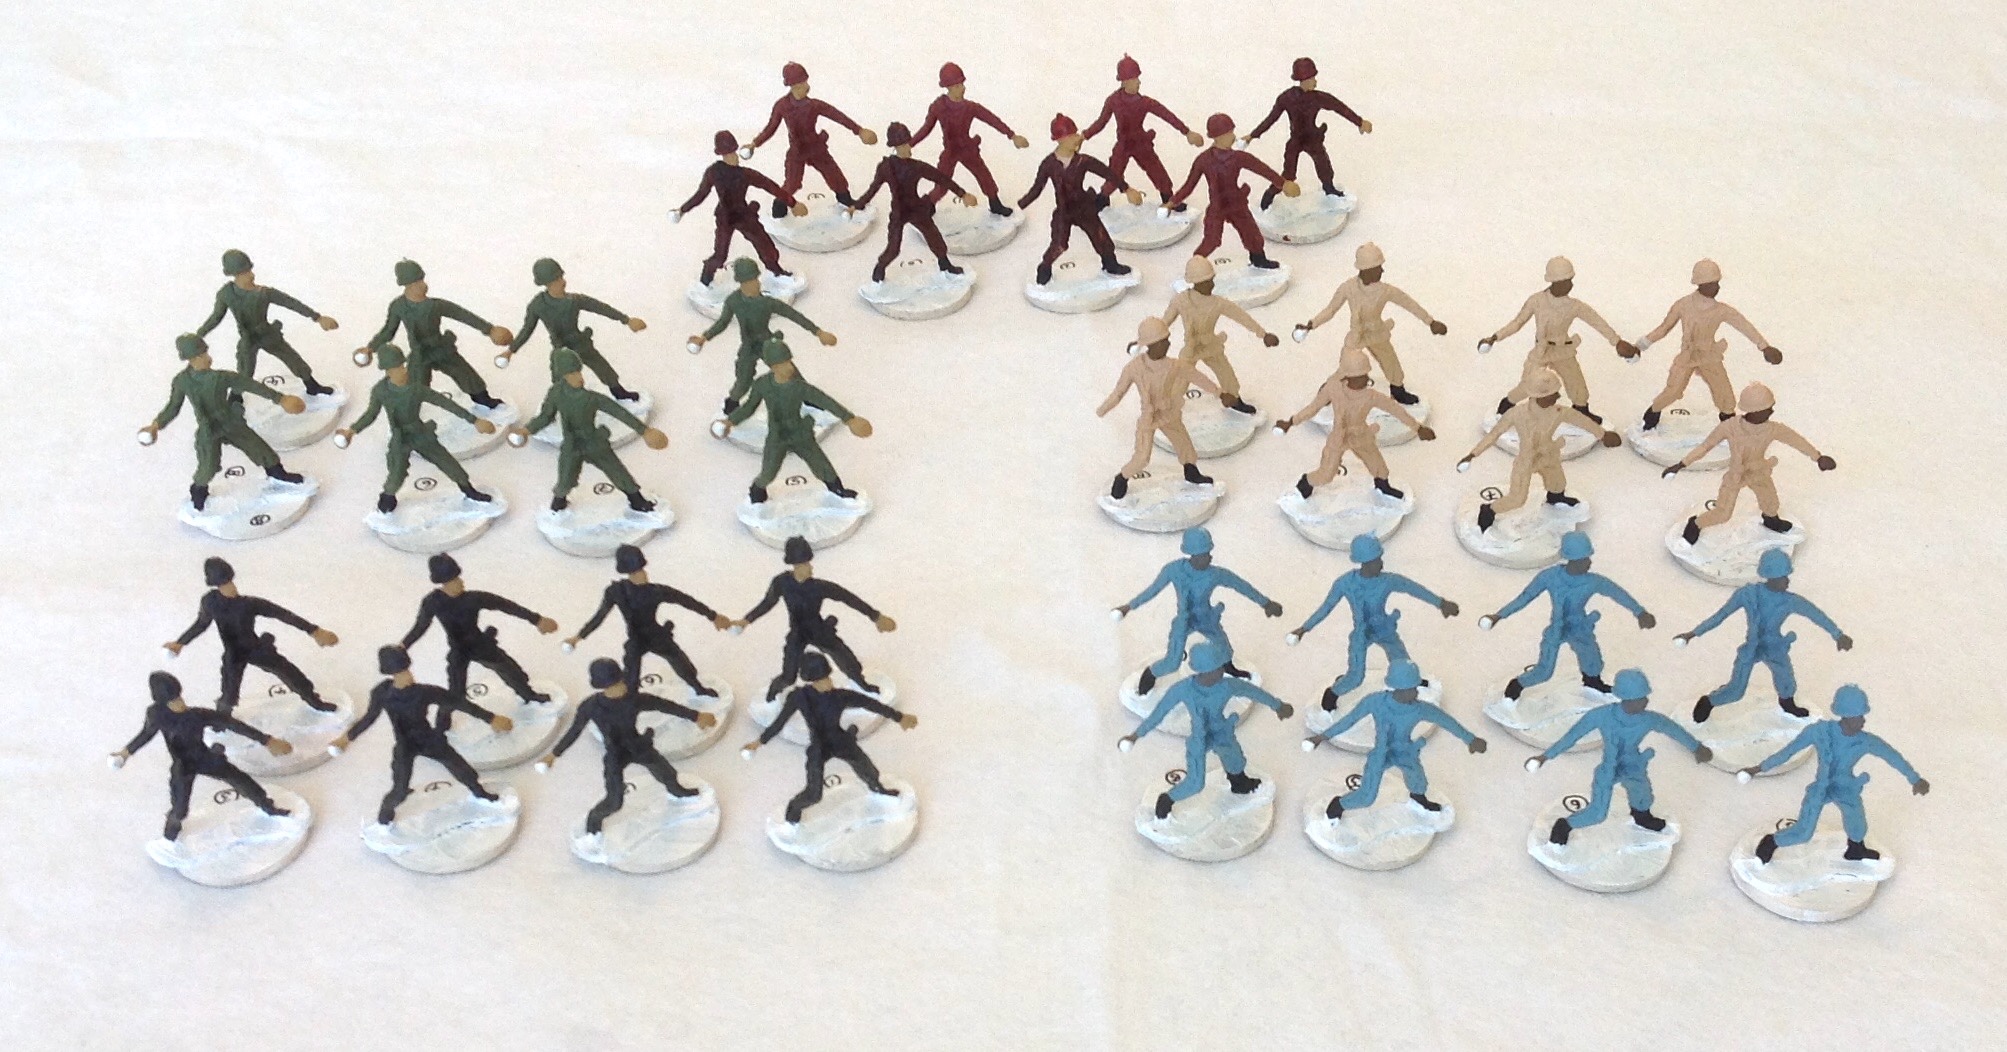 Set HOCKEY PLAYERS Plastic Figures 12 TWO Teams 1/32 54mm Scale NEW! 